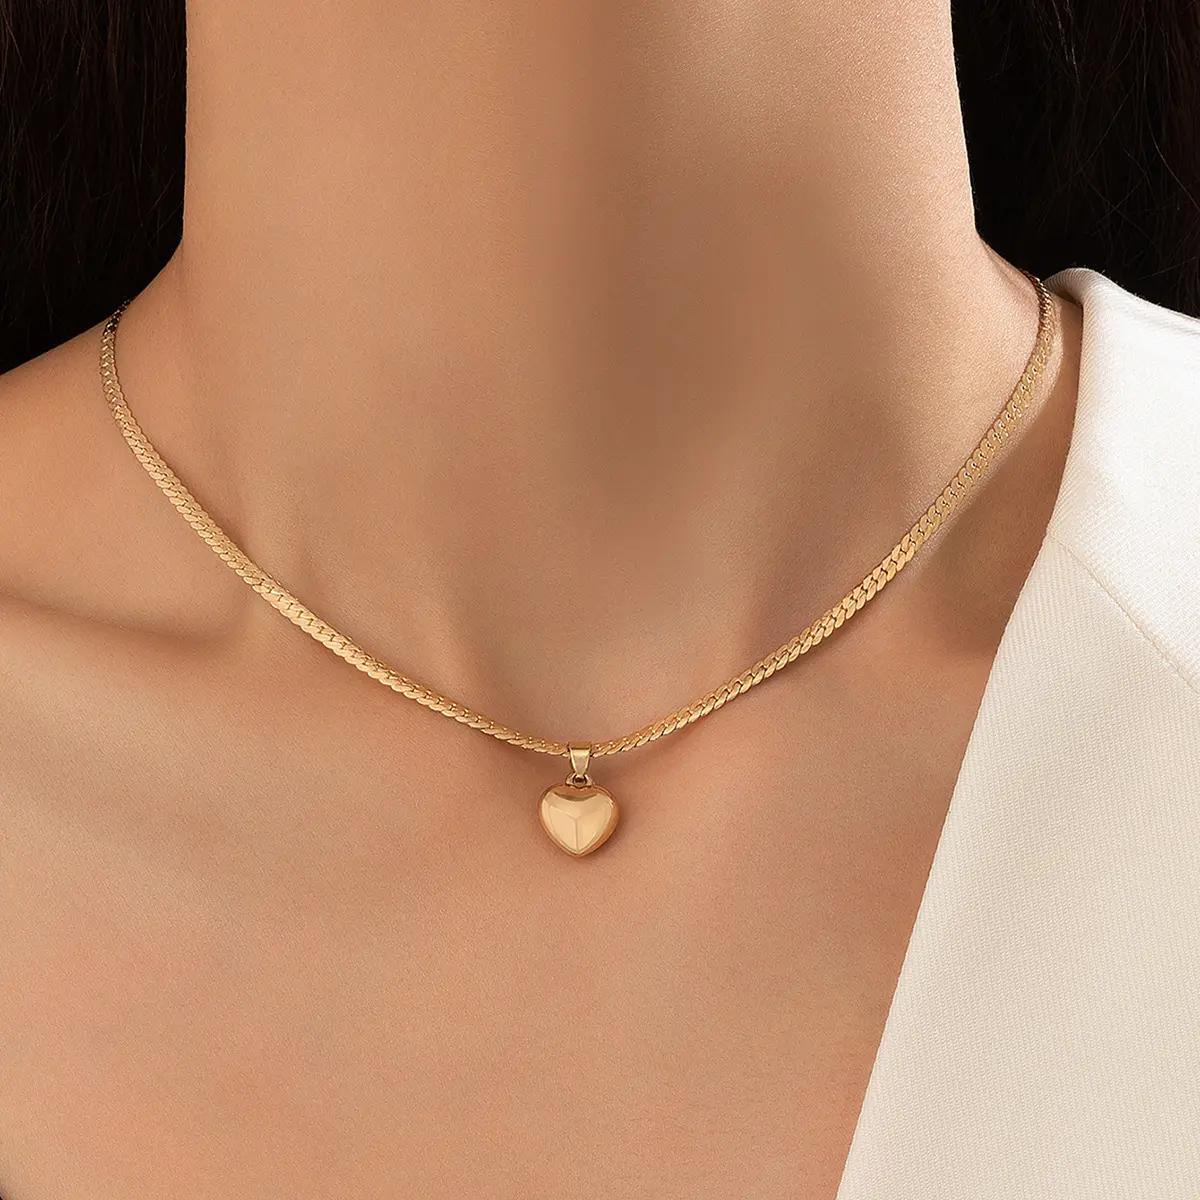 Popular Jewelry Gold Single Layer Necklace Simple Fashion Heart Shape Pendant Necklace